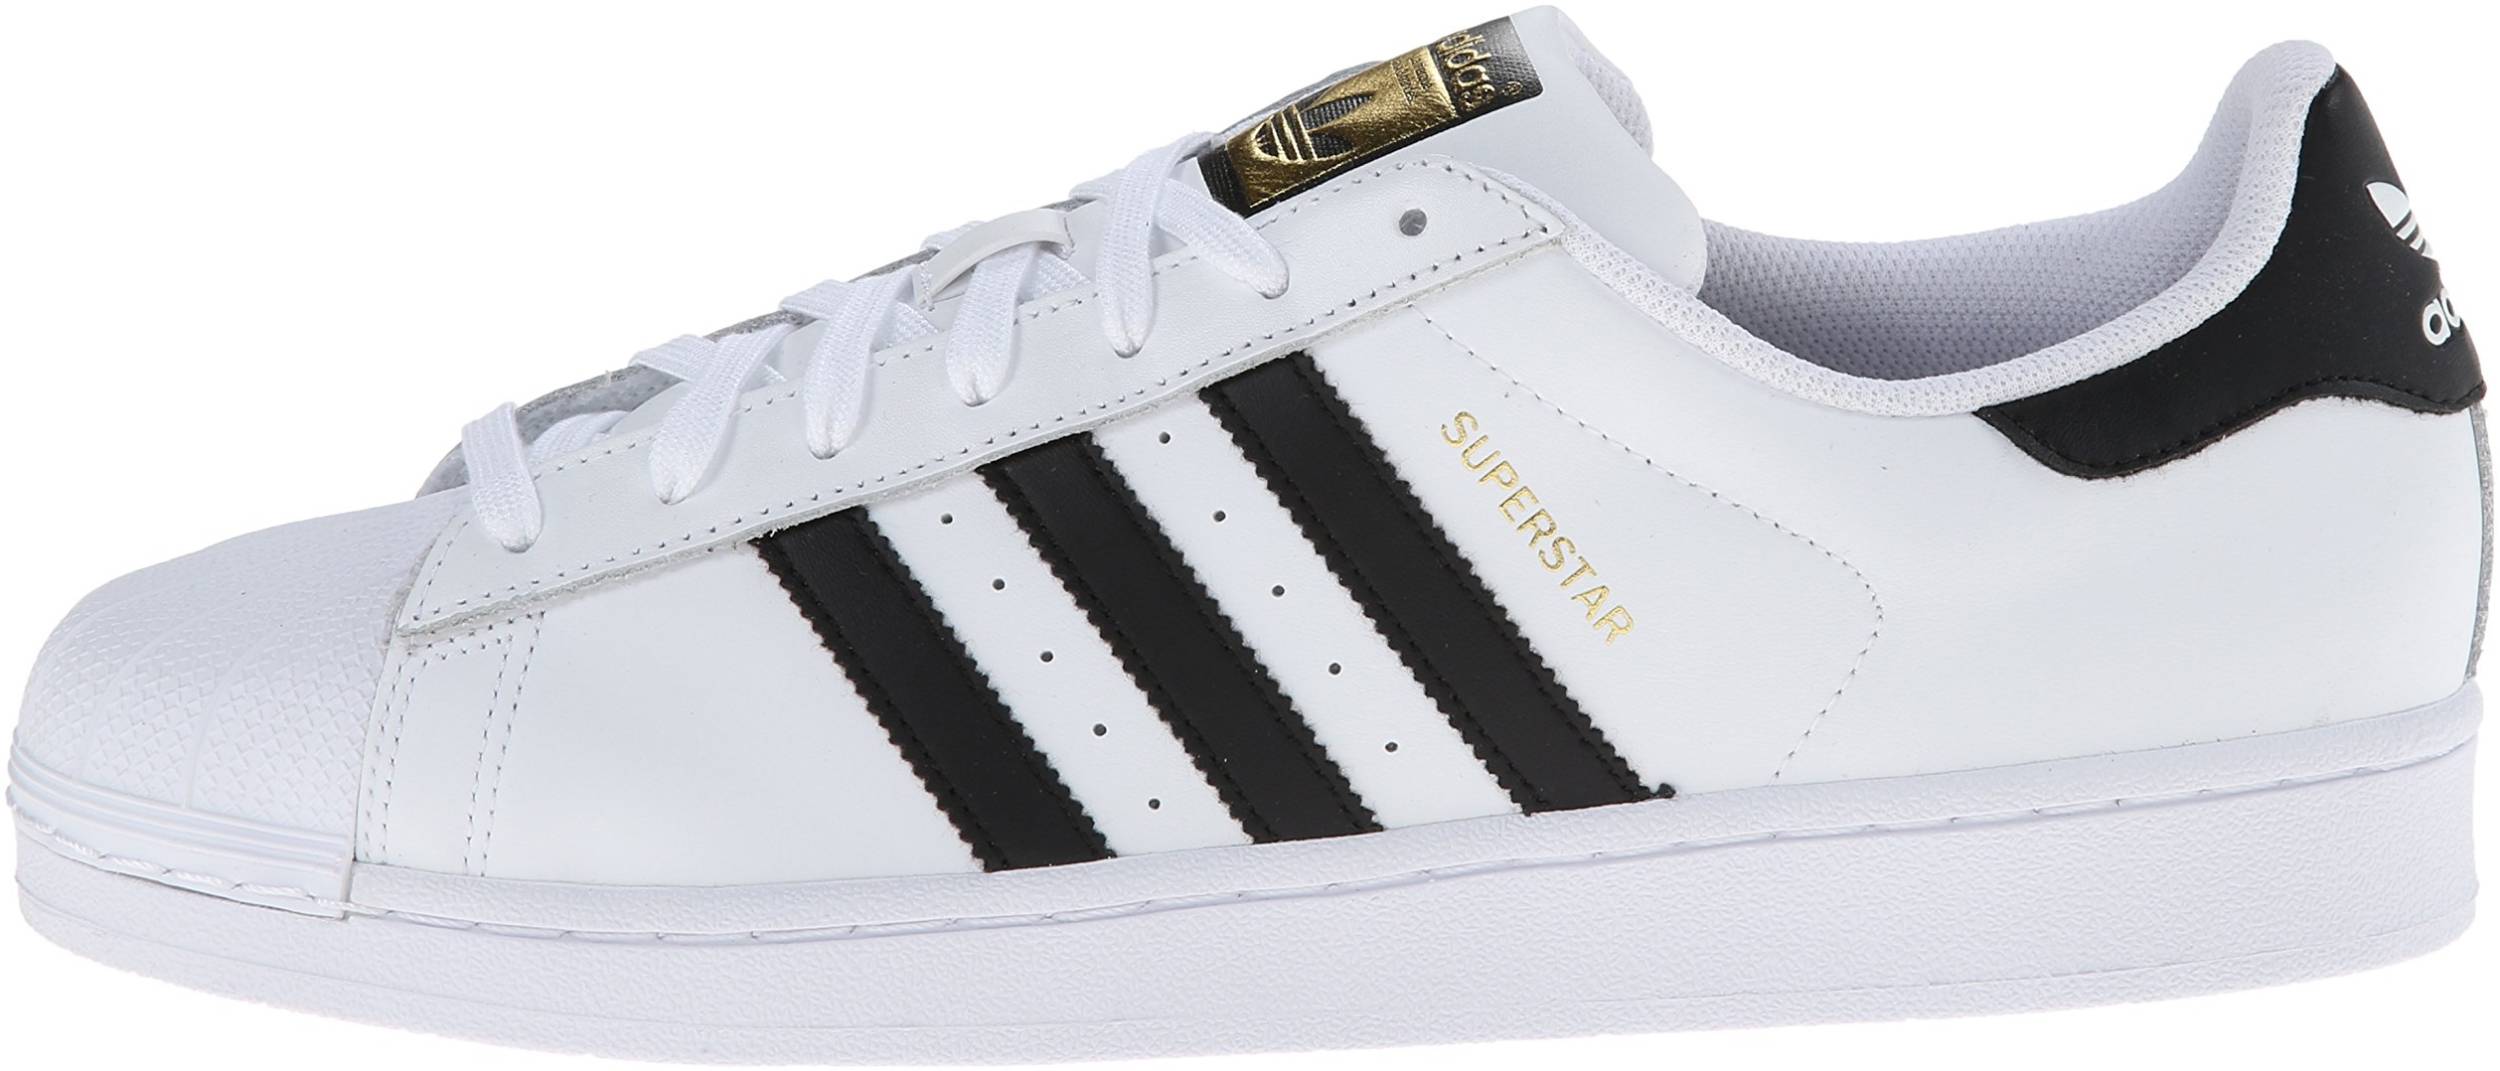 Headless To govern Dancer 80+ colors of Adidas Superstar (from $27) | RunRepeat